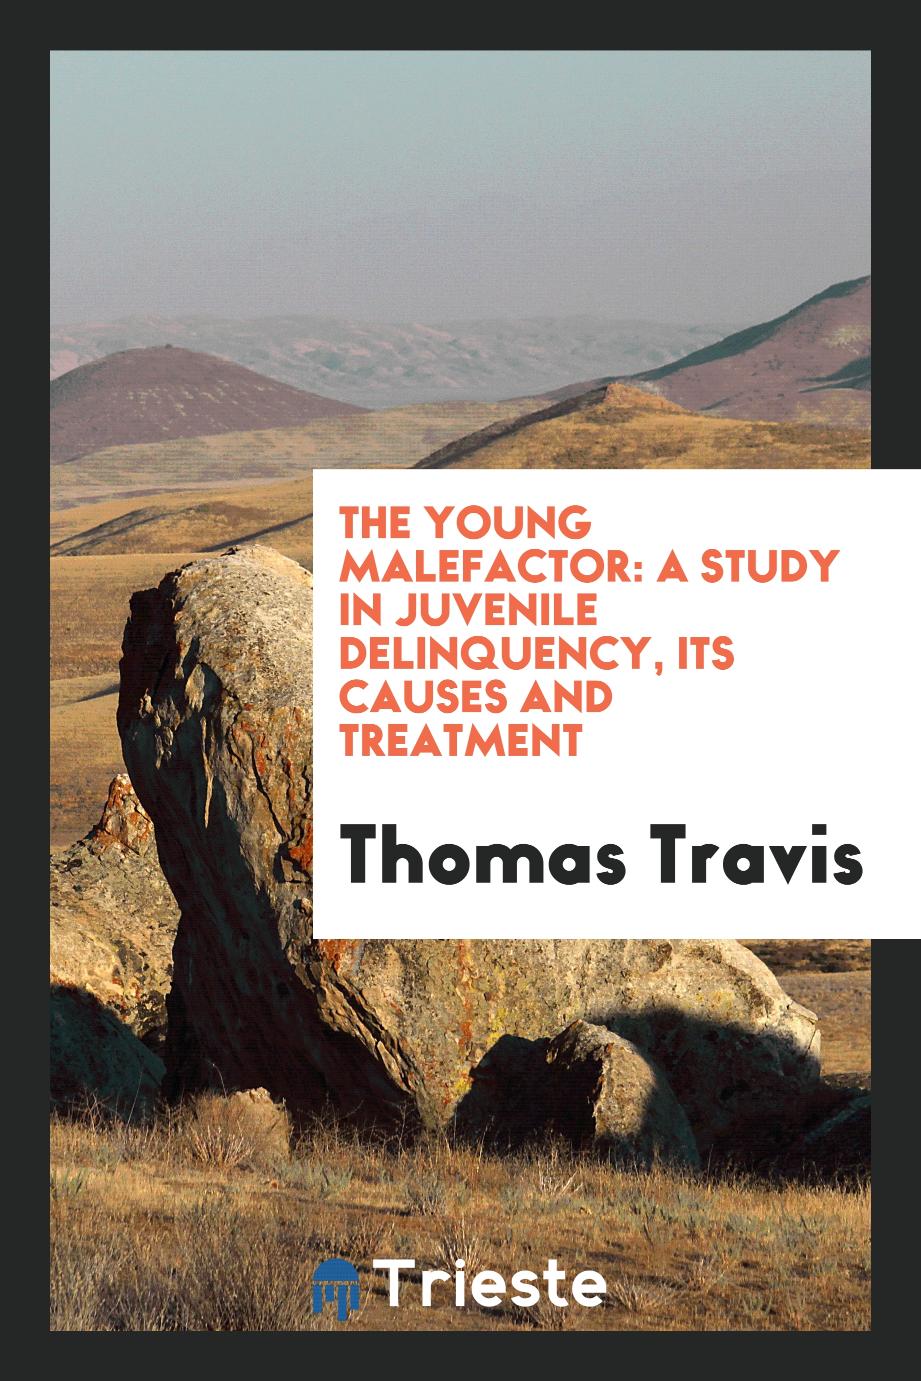 The young malefactor: a study in juvenile delinquency, its causes and treatment